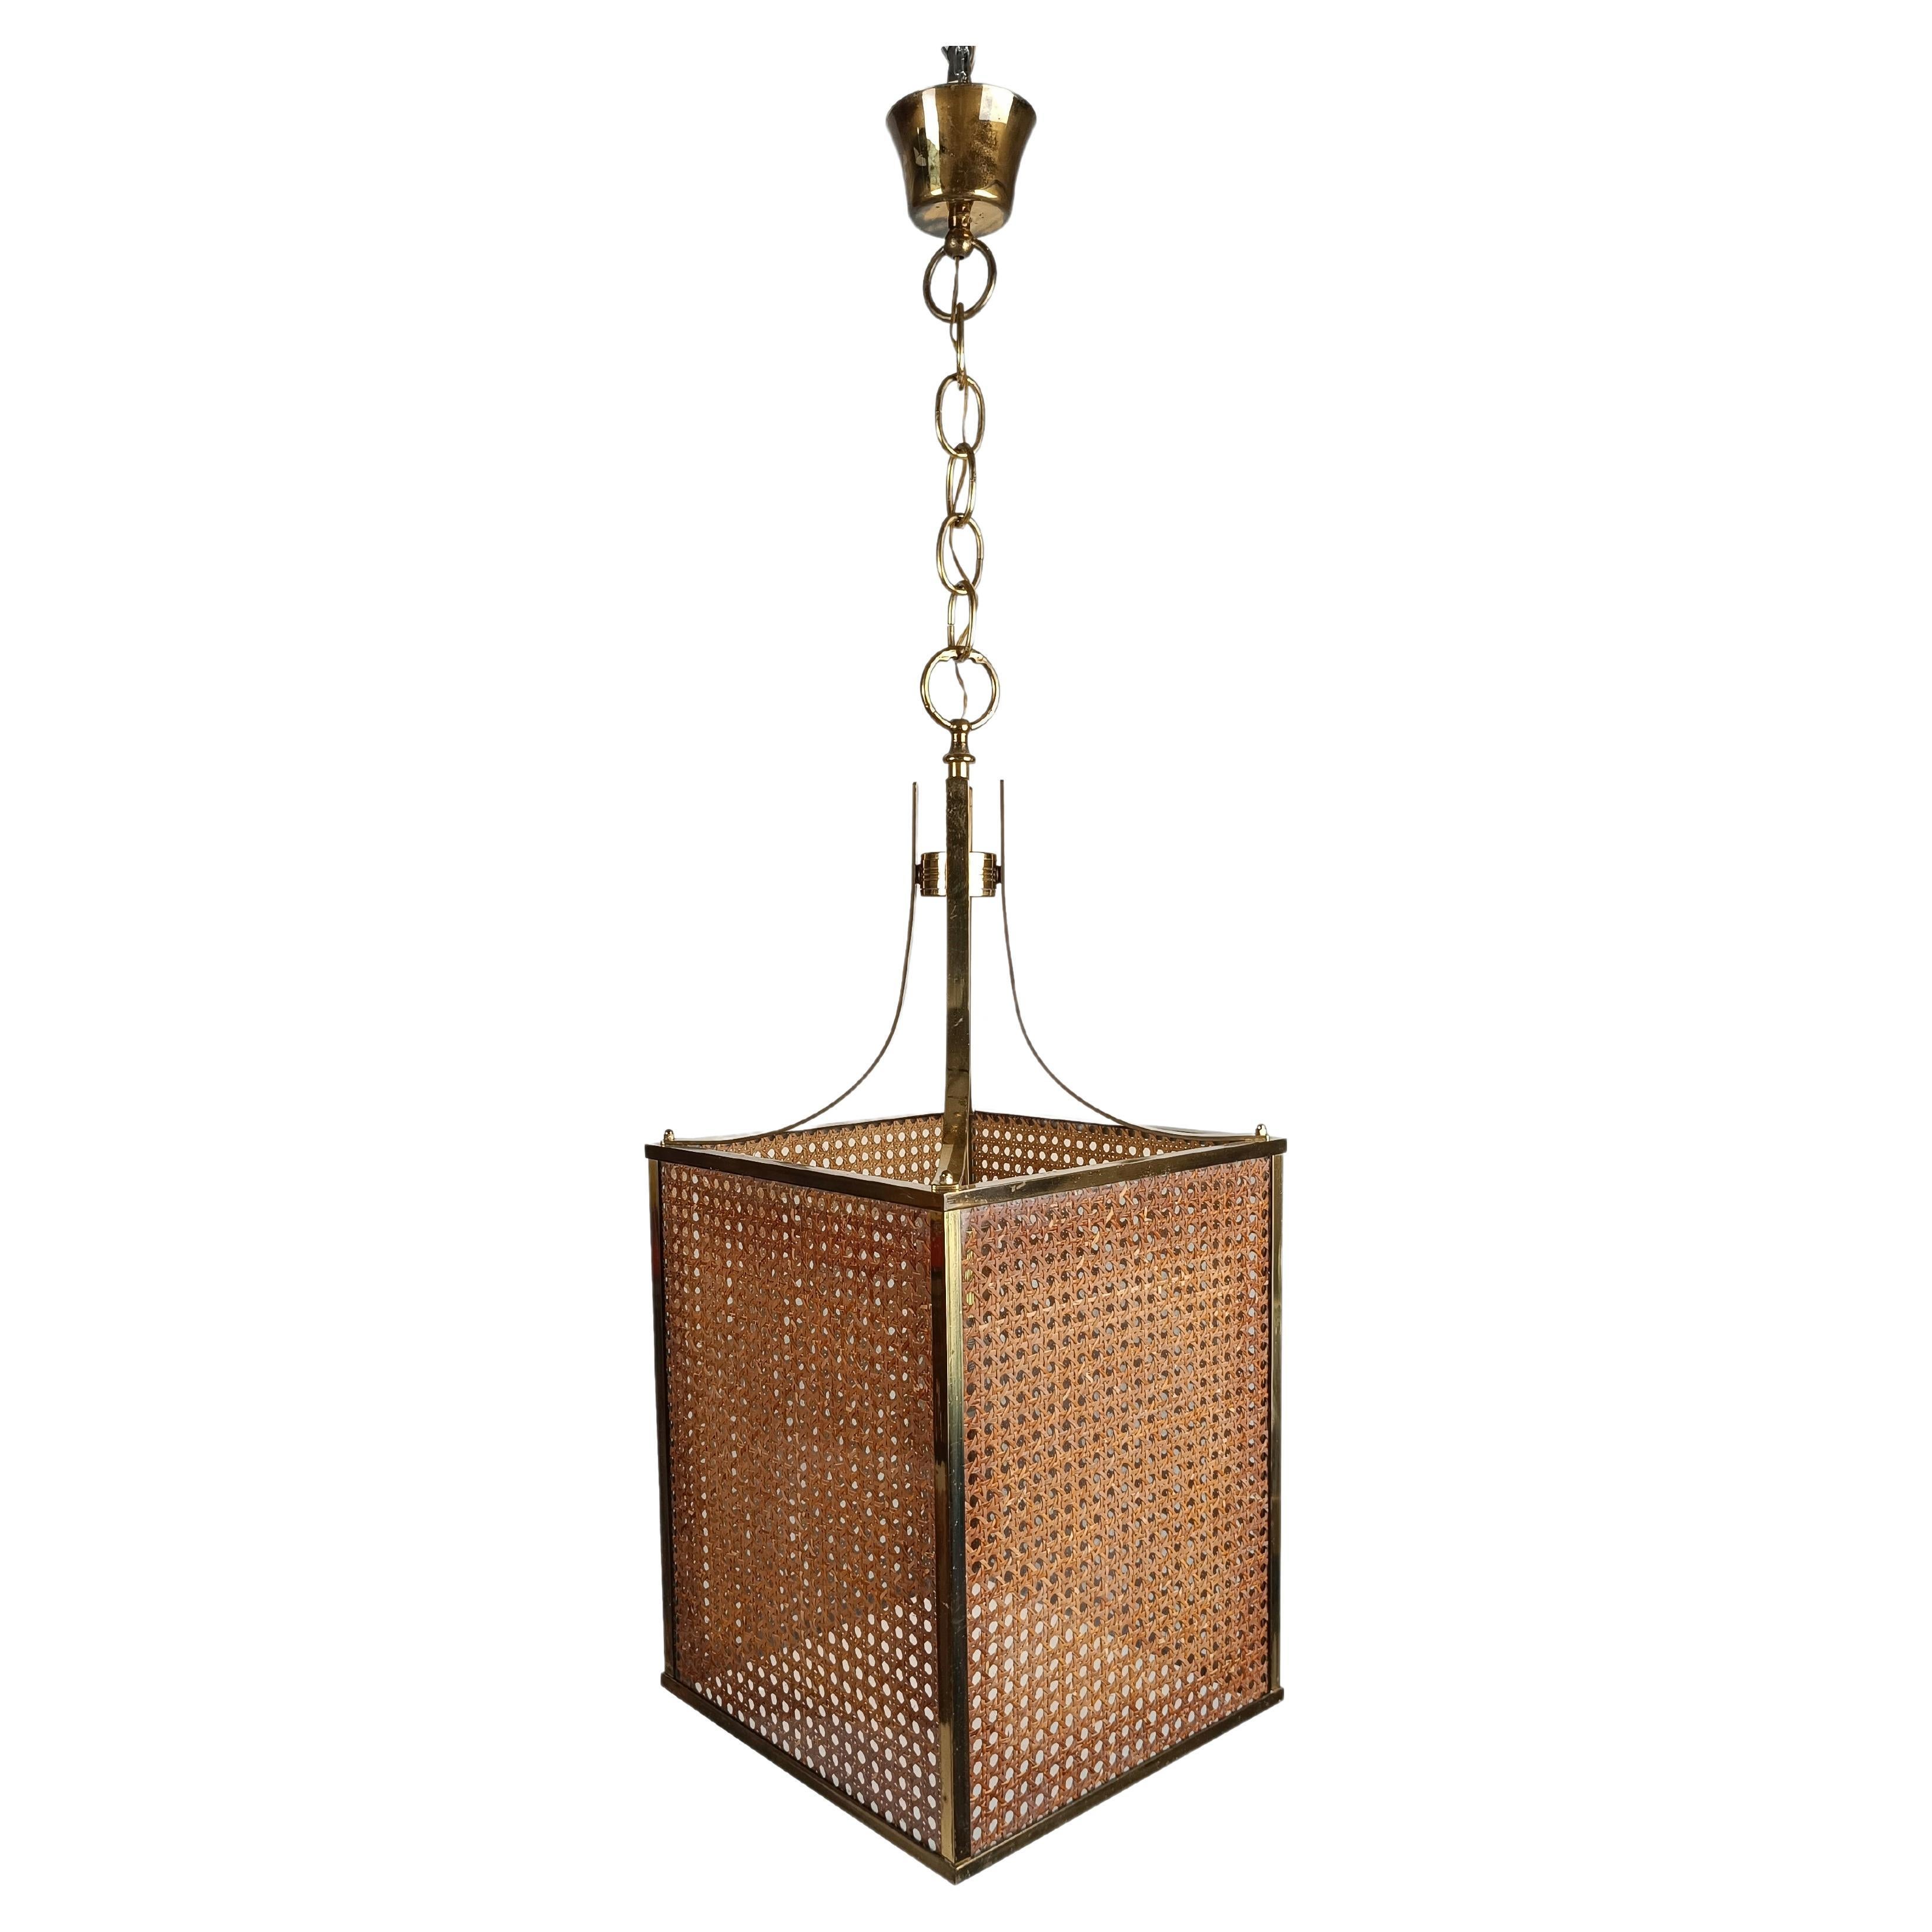 70s Pendant Light made in Brass Glass & Cane Webbing, Chinese Chippendale style  For Sale